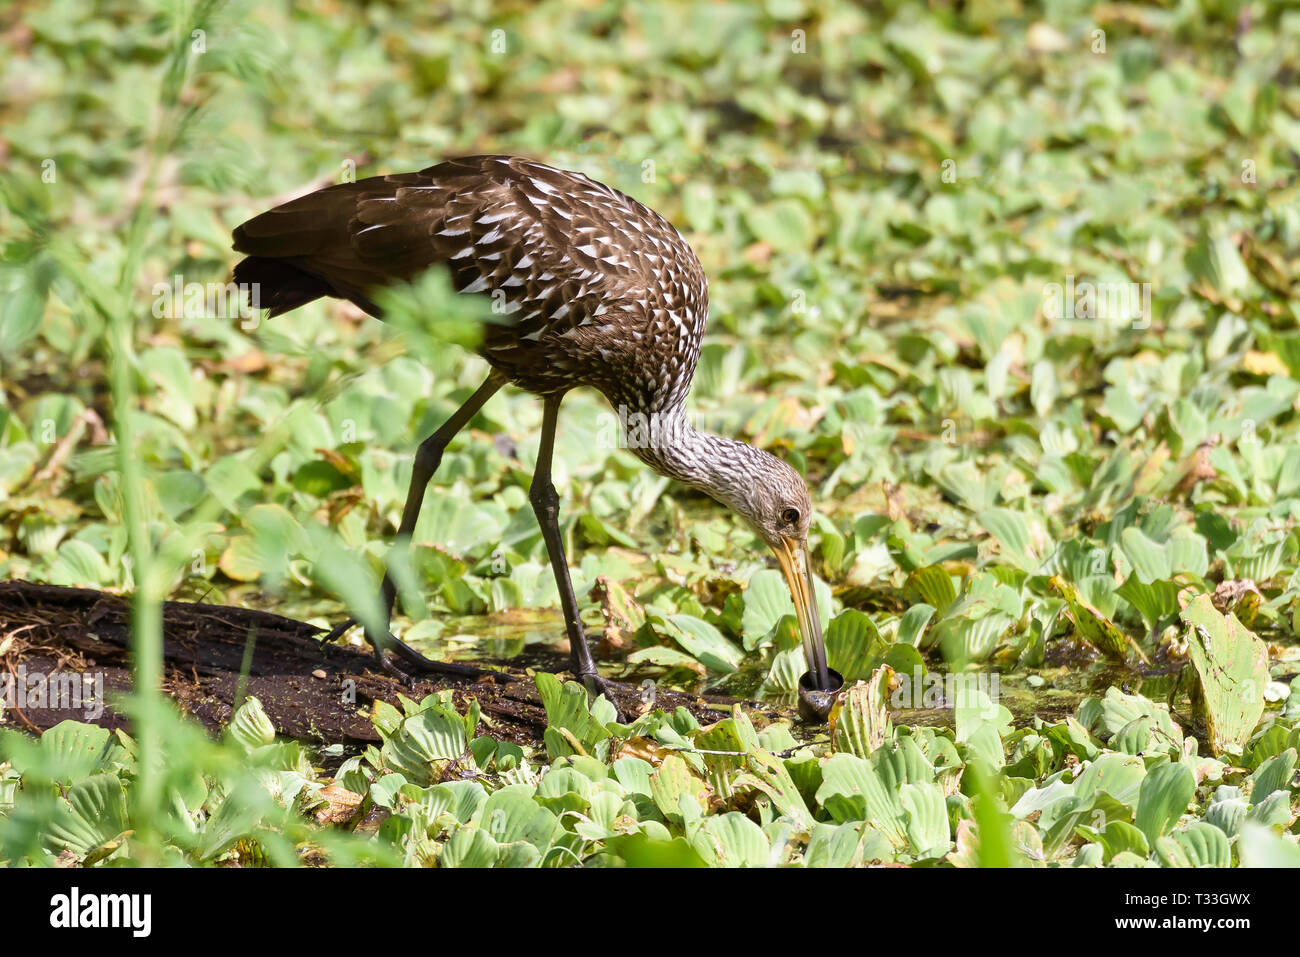 Limpkin (Aramus guarauna) eating an apple snail caught in water cabbage covered swamp water, Corkscrew Swamp Sanctuary, Florida, USA Stock Photo